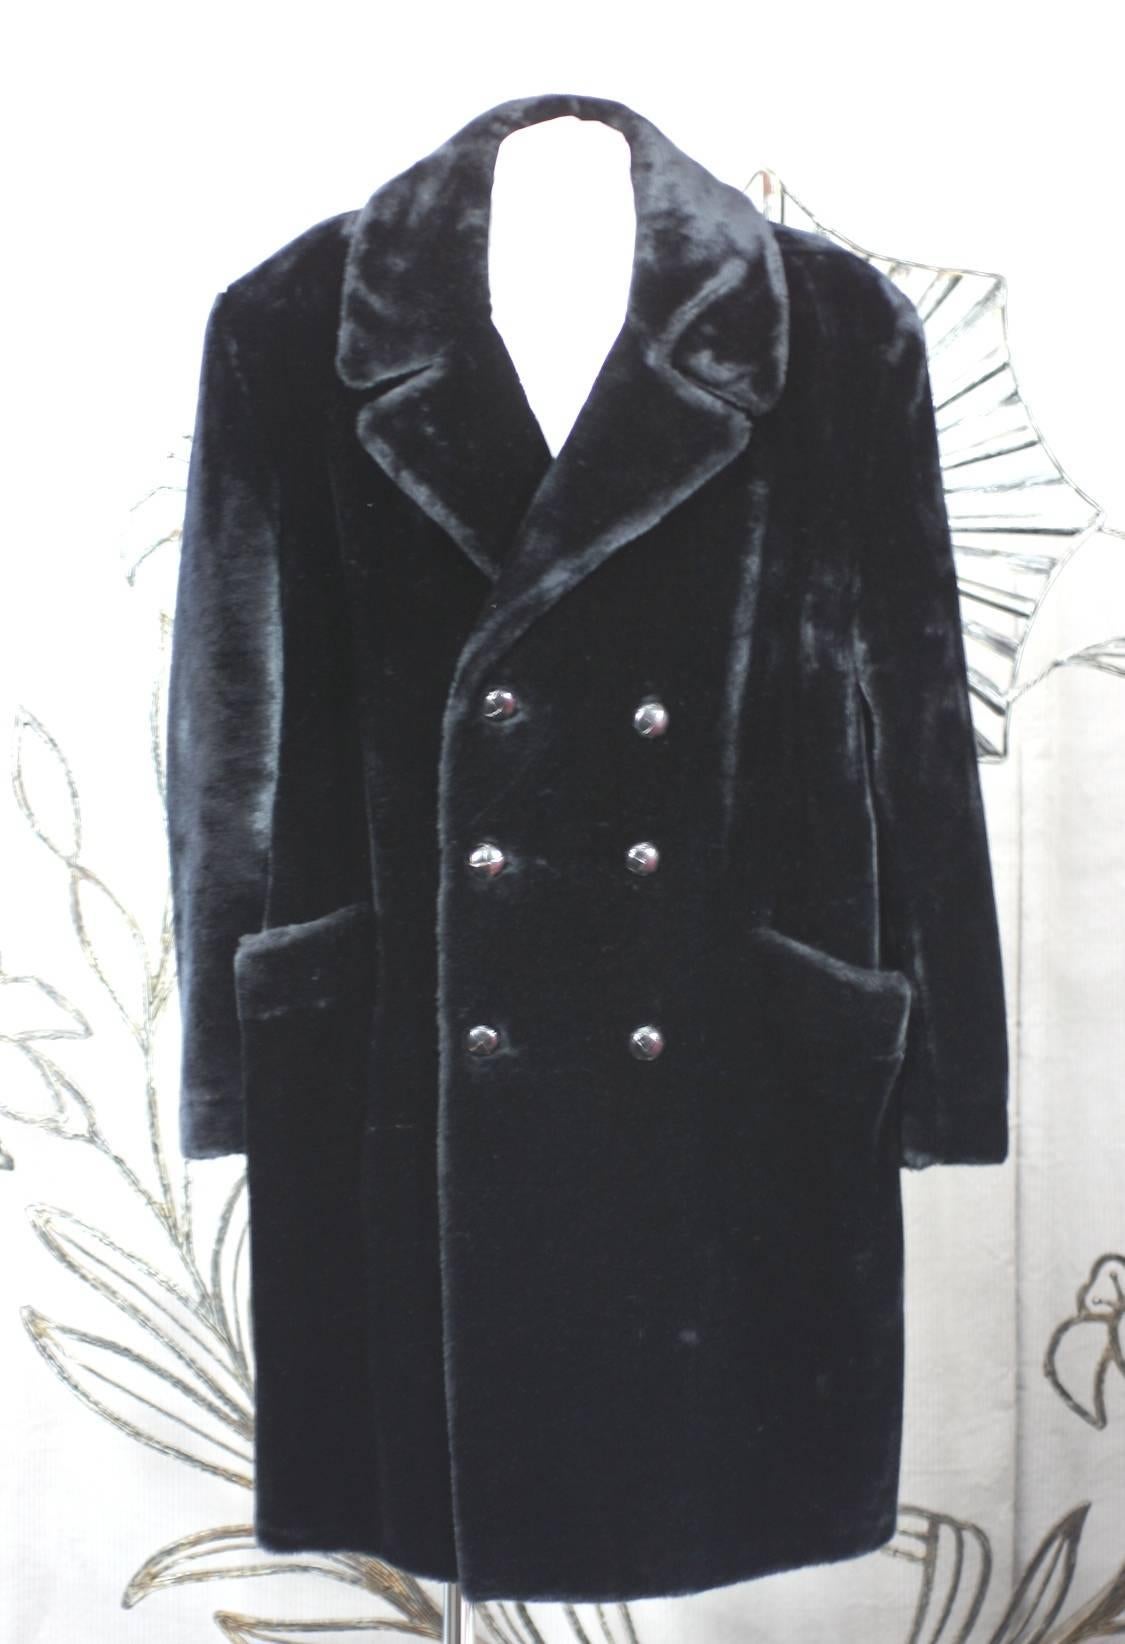 Men's Plush Faux Alaskan Seal Car Coat.
The ladies had Blackgama in the period, the men had Borg-gama or Borg Alaskan...a luxurious faux plush fur that was created to resemble a high pile Alaskan seal pelt. 
In reality, it has more of a teddy bear